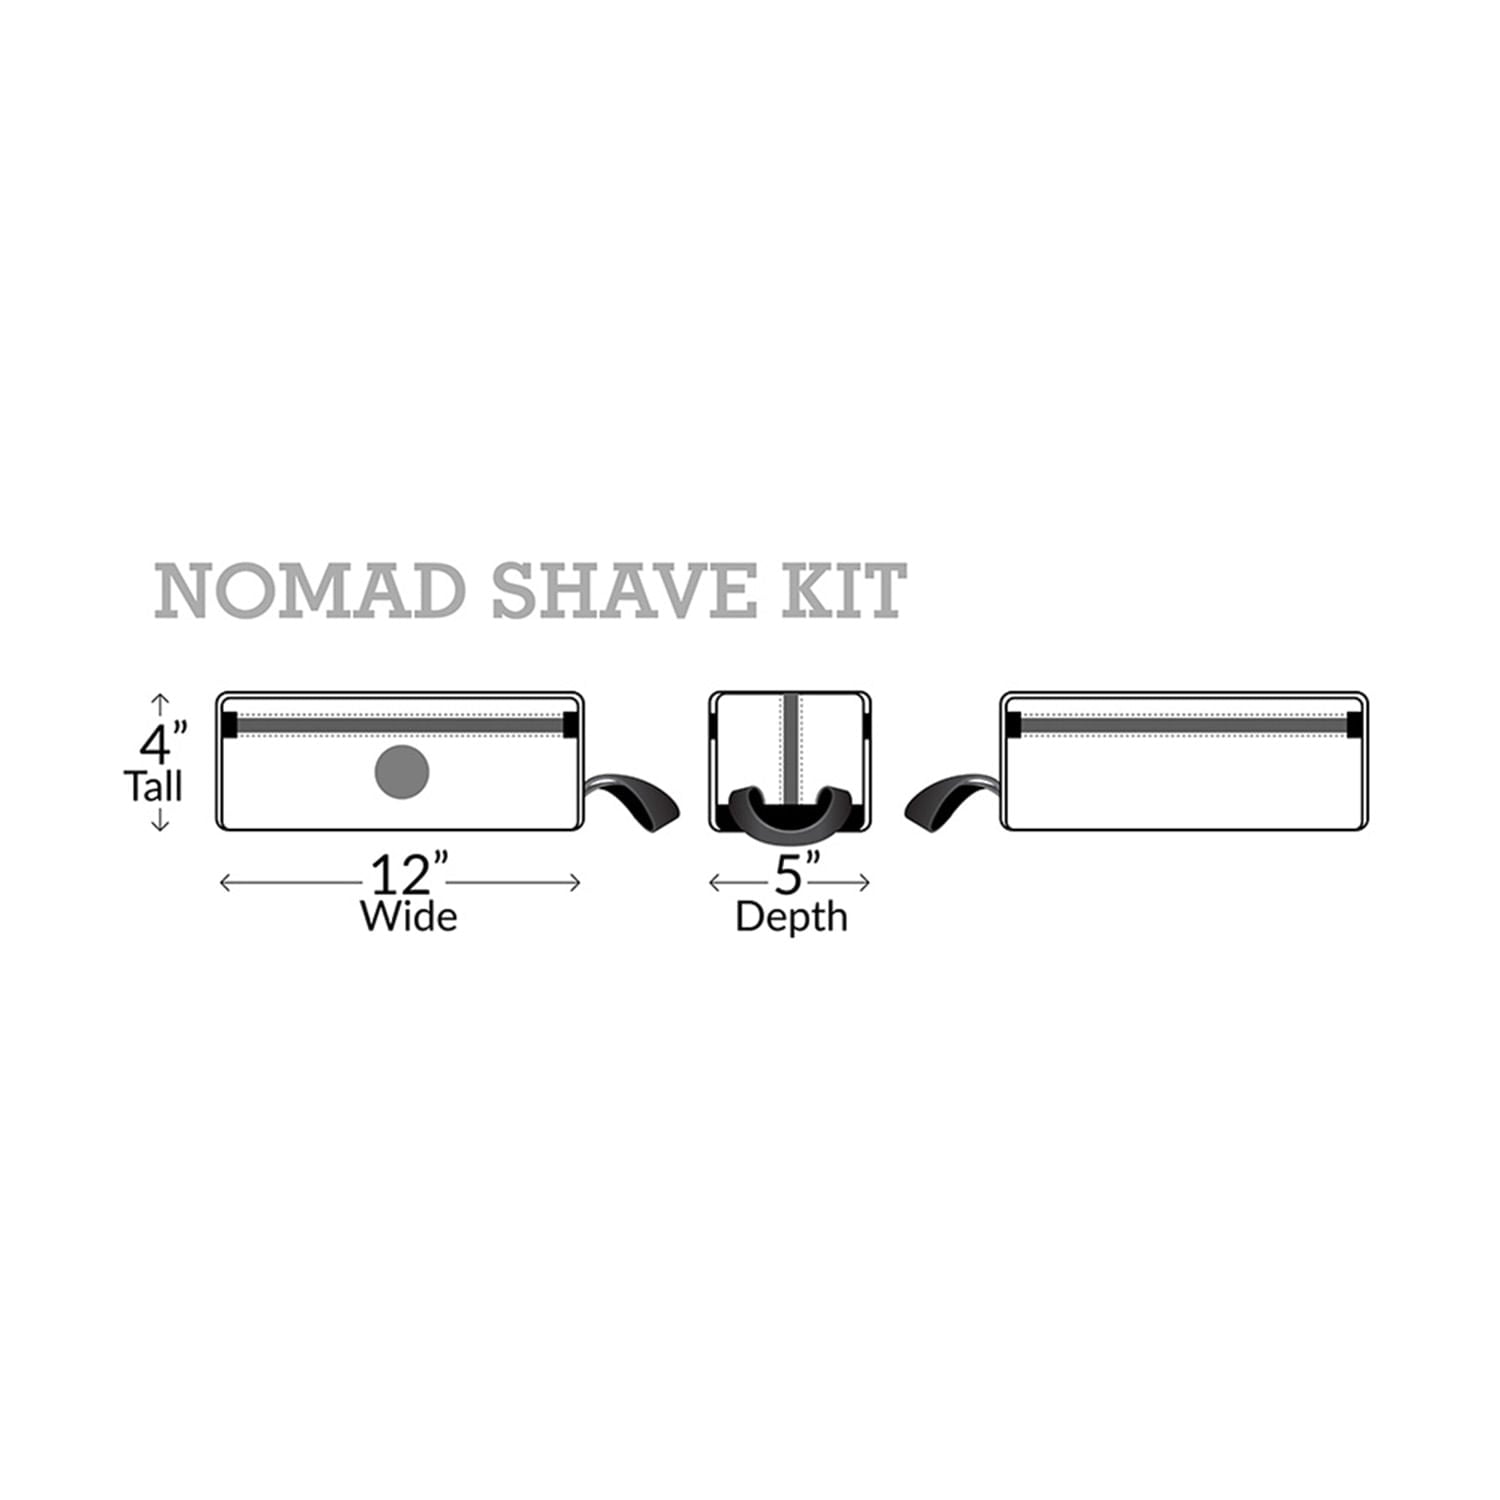 Nomad Shave Kit dimensions 4 inches Tall x 12 inches Wide x 5 inches Depth.